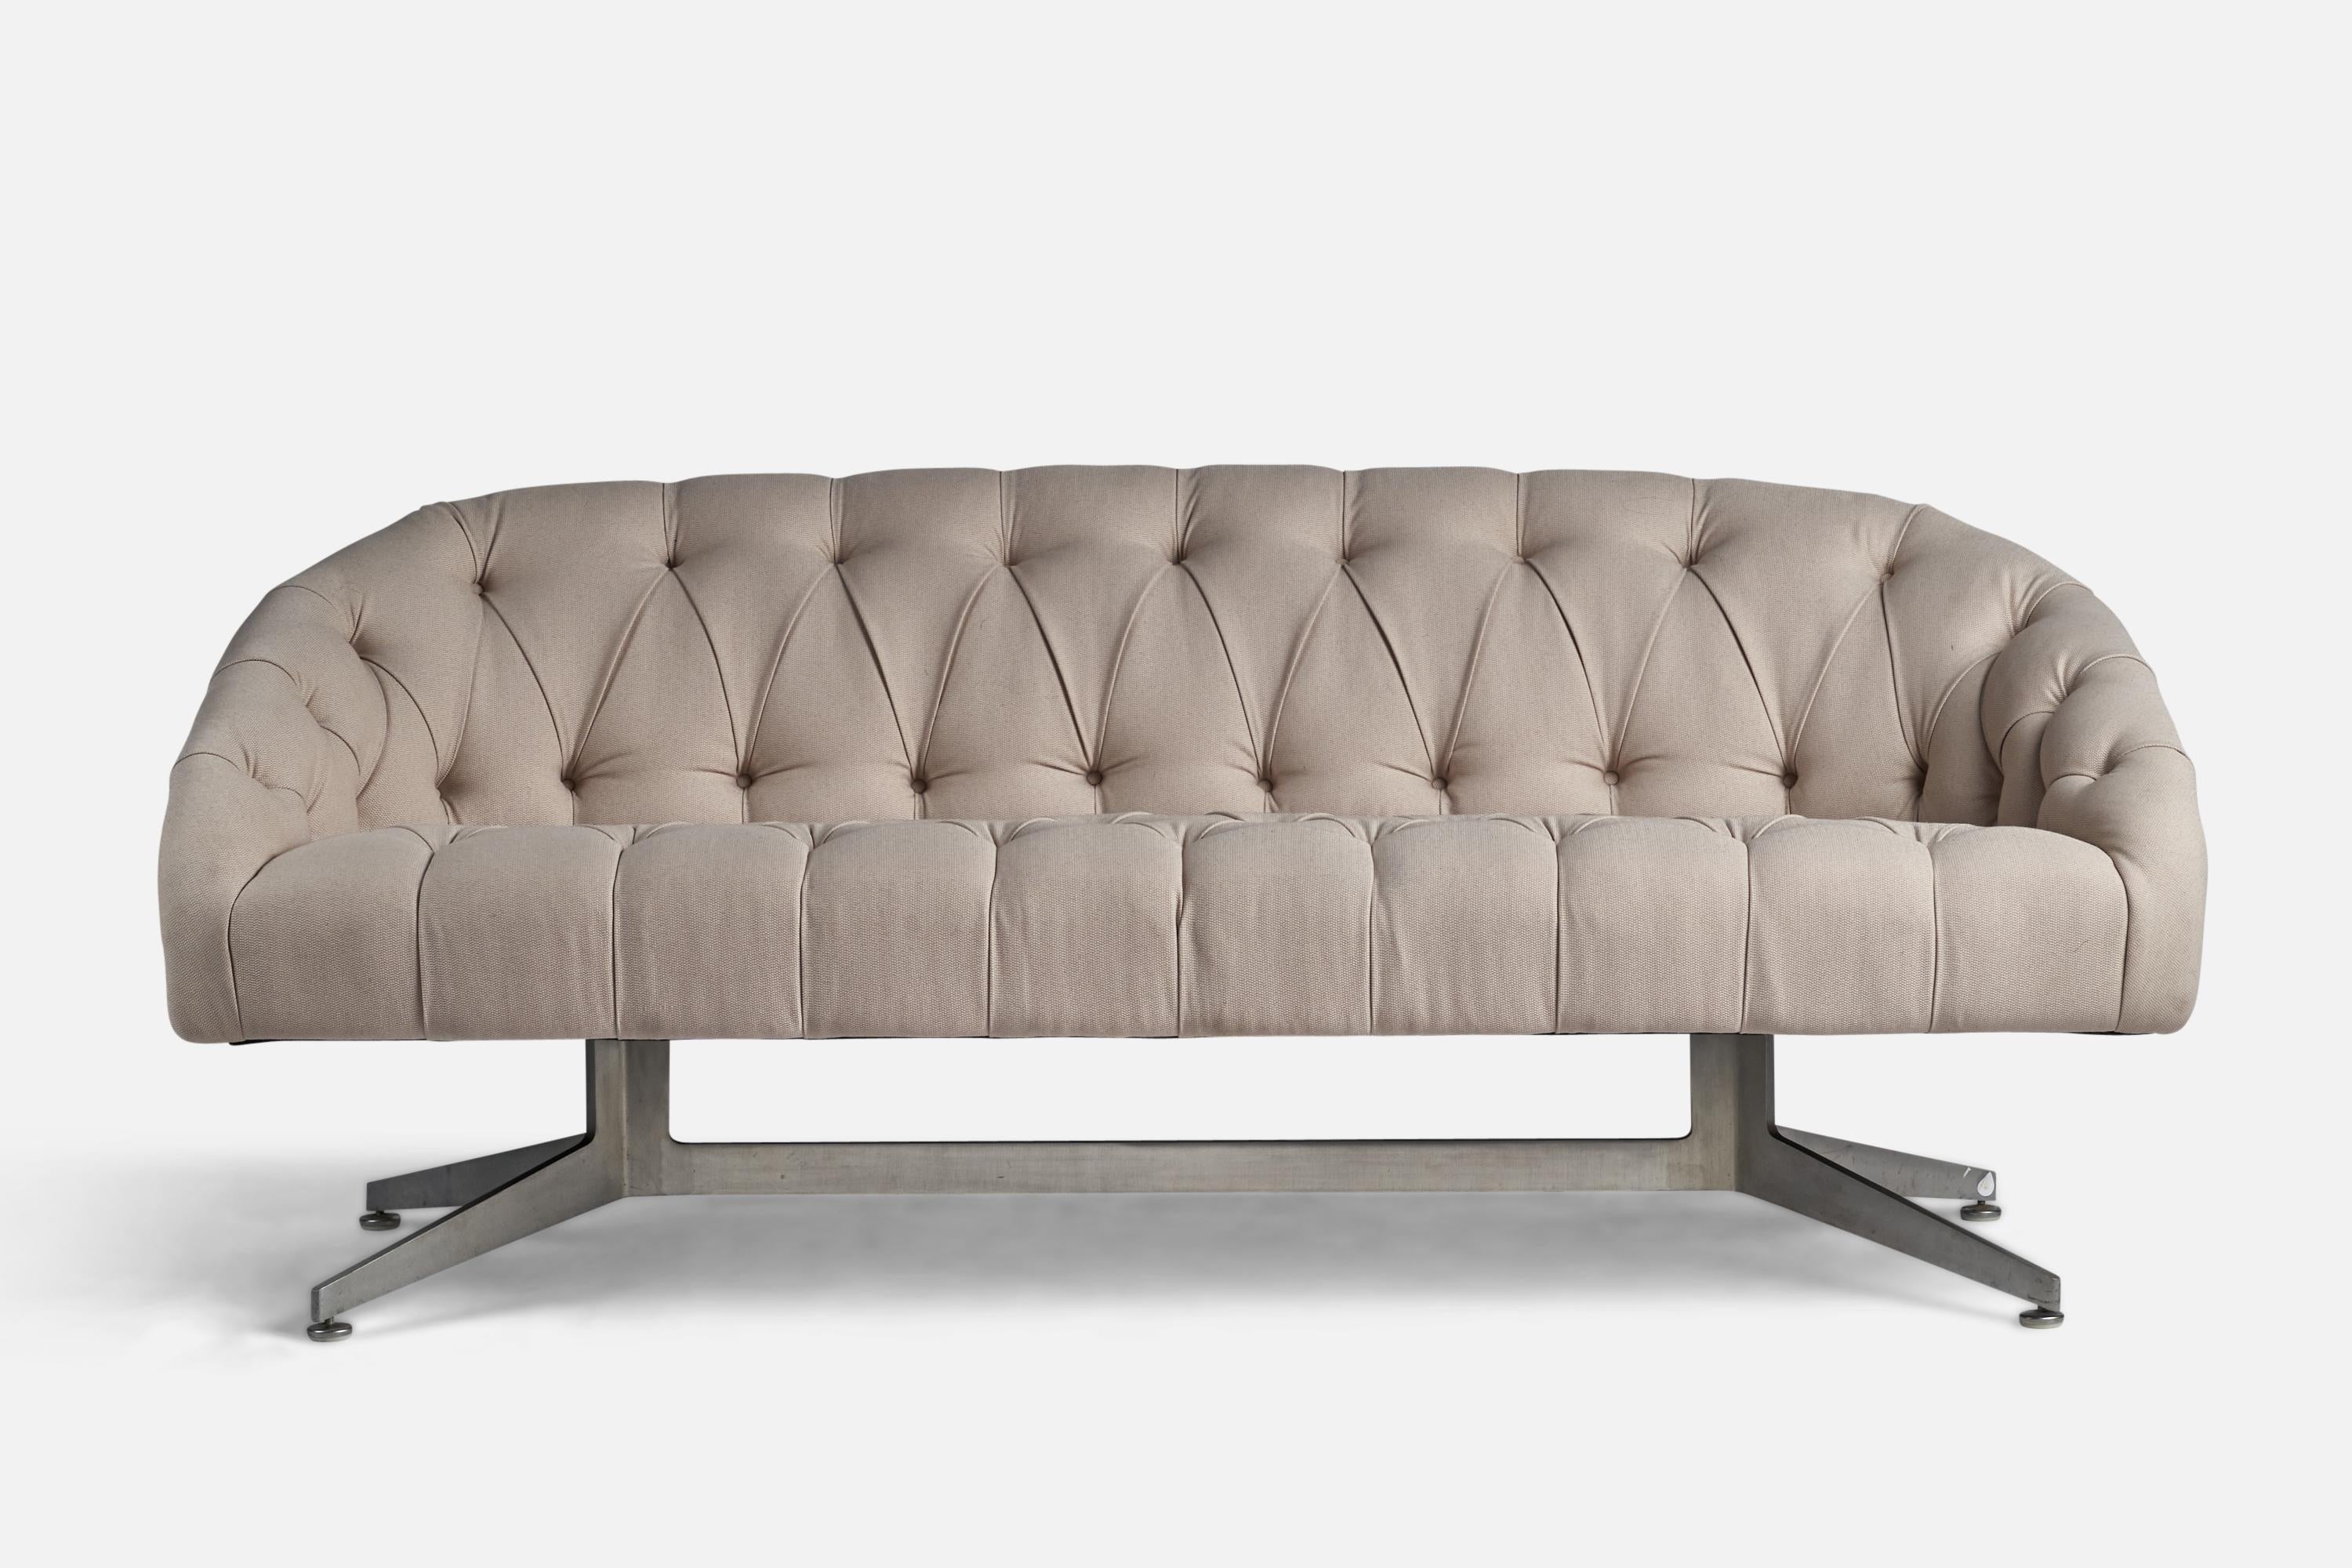 An aluminium and light grey fabric sofa designed by Ward Bennet and produced by Lehigh Leopold, USA, c. 1950s.
18” seat height